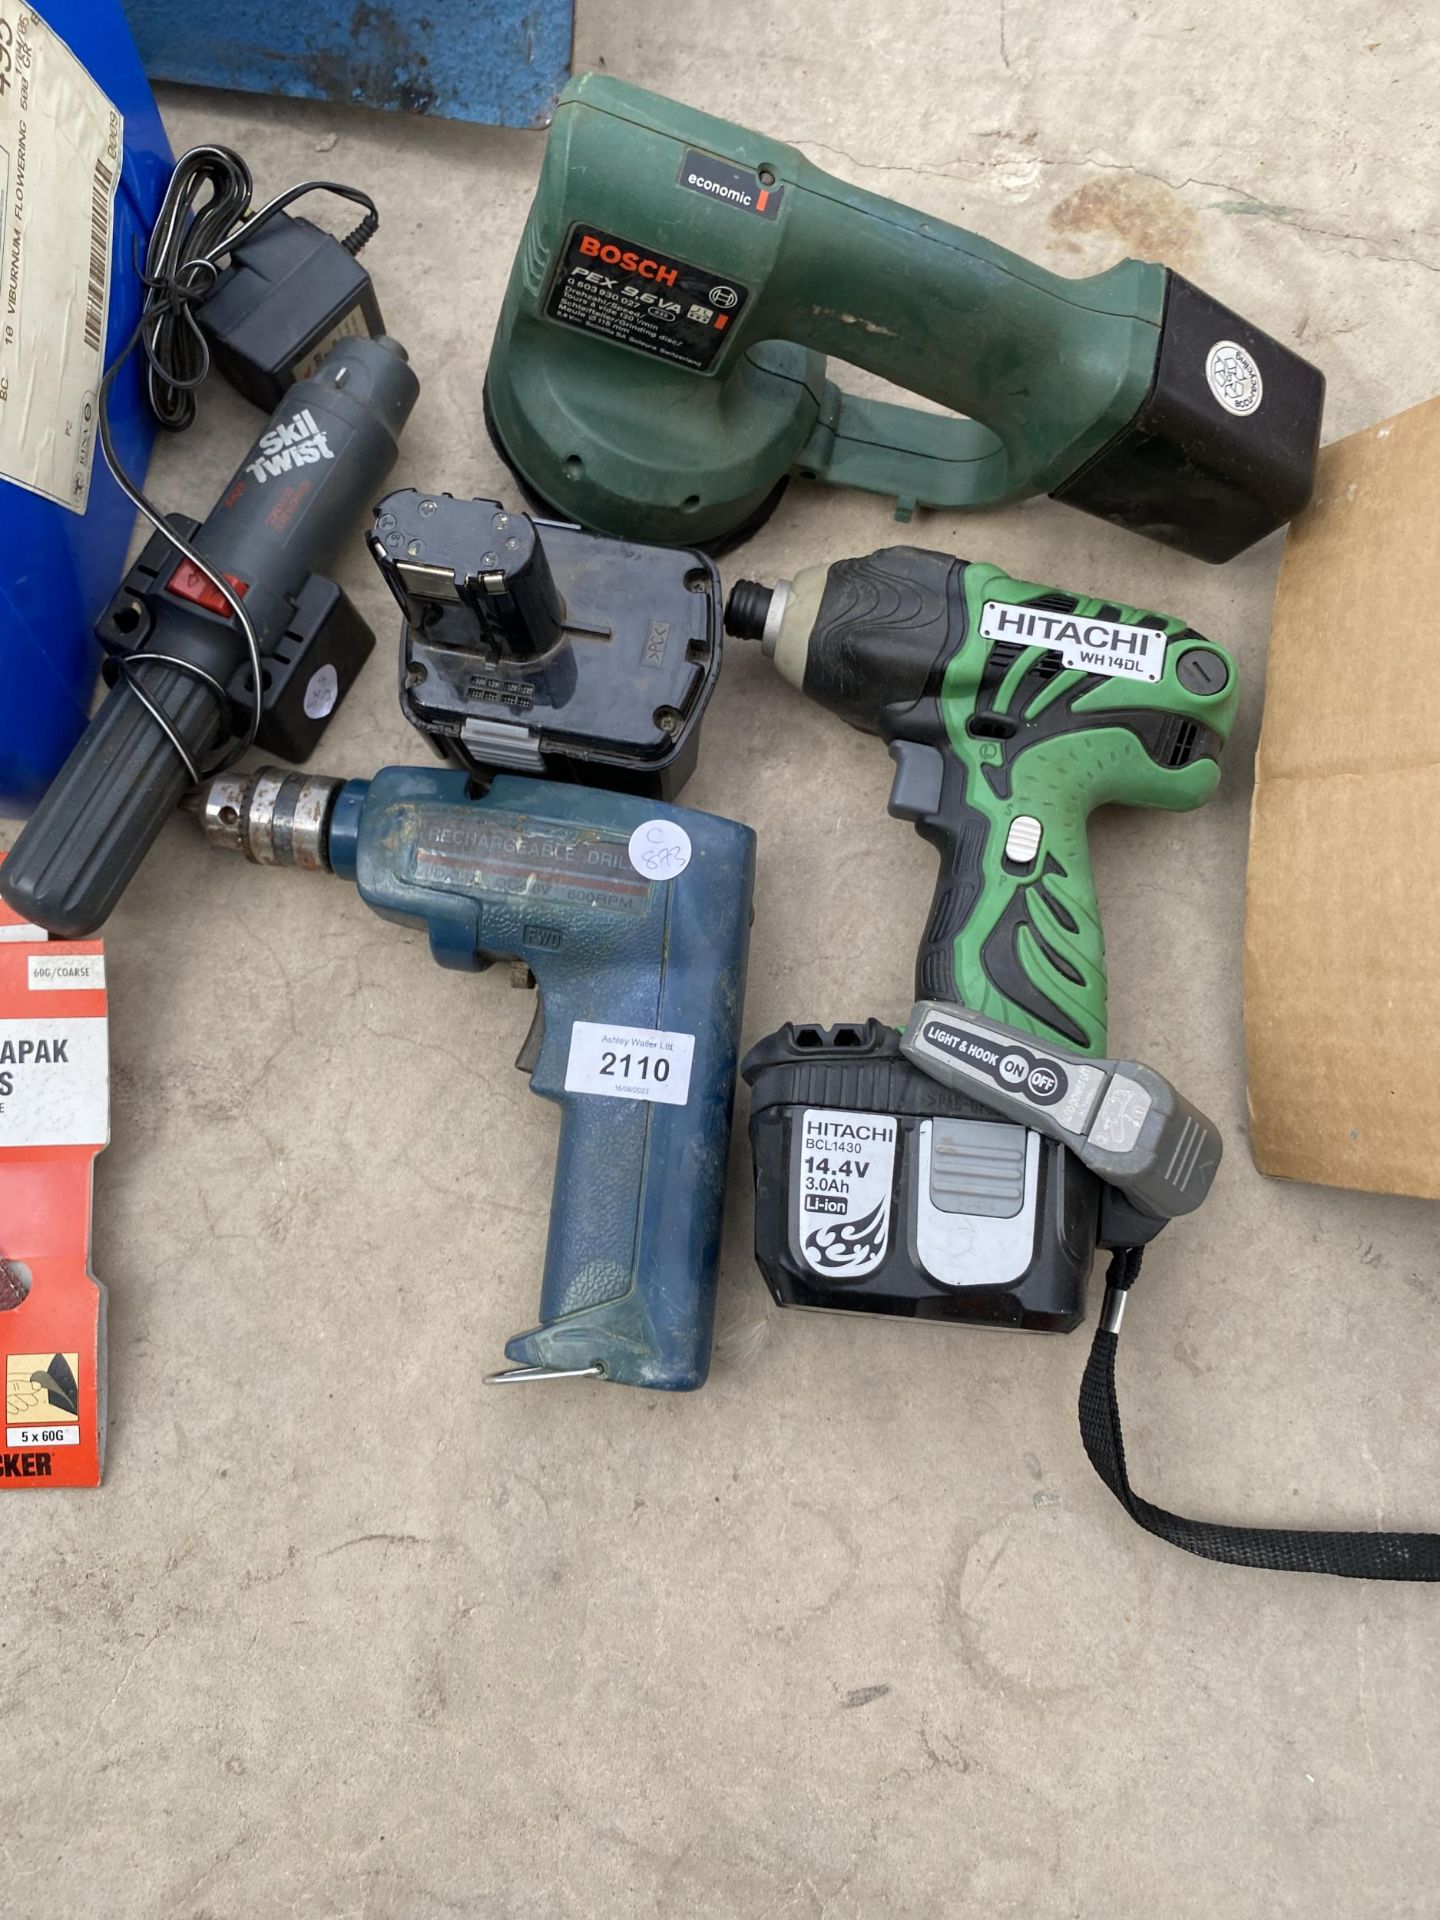 FOUR POWER TOOLS TO INCLUDE AN HITACHI DRILL, BOSCH SANDER, ETC